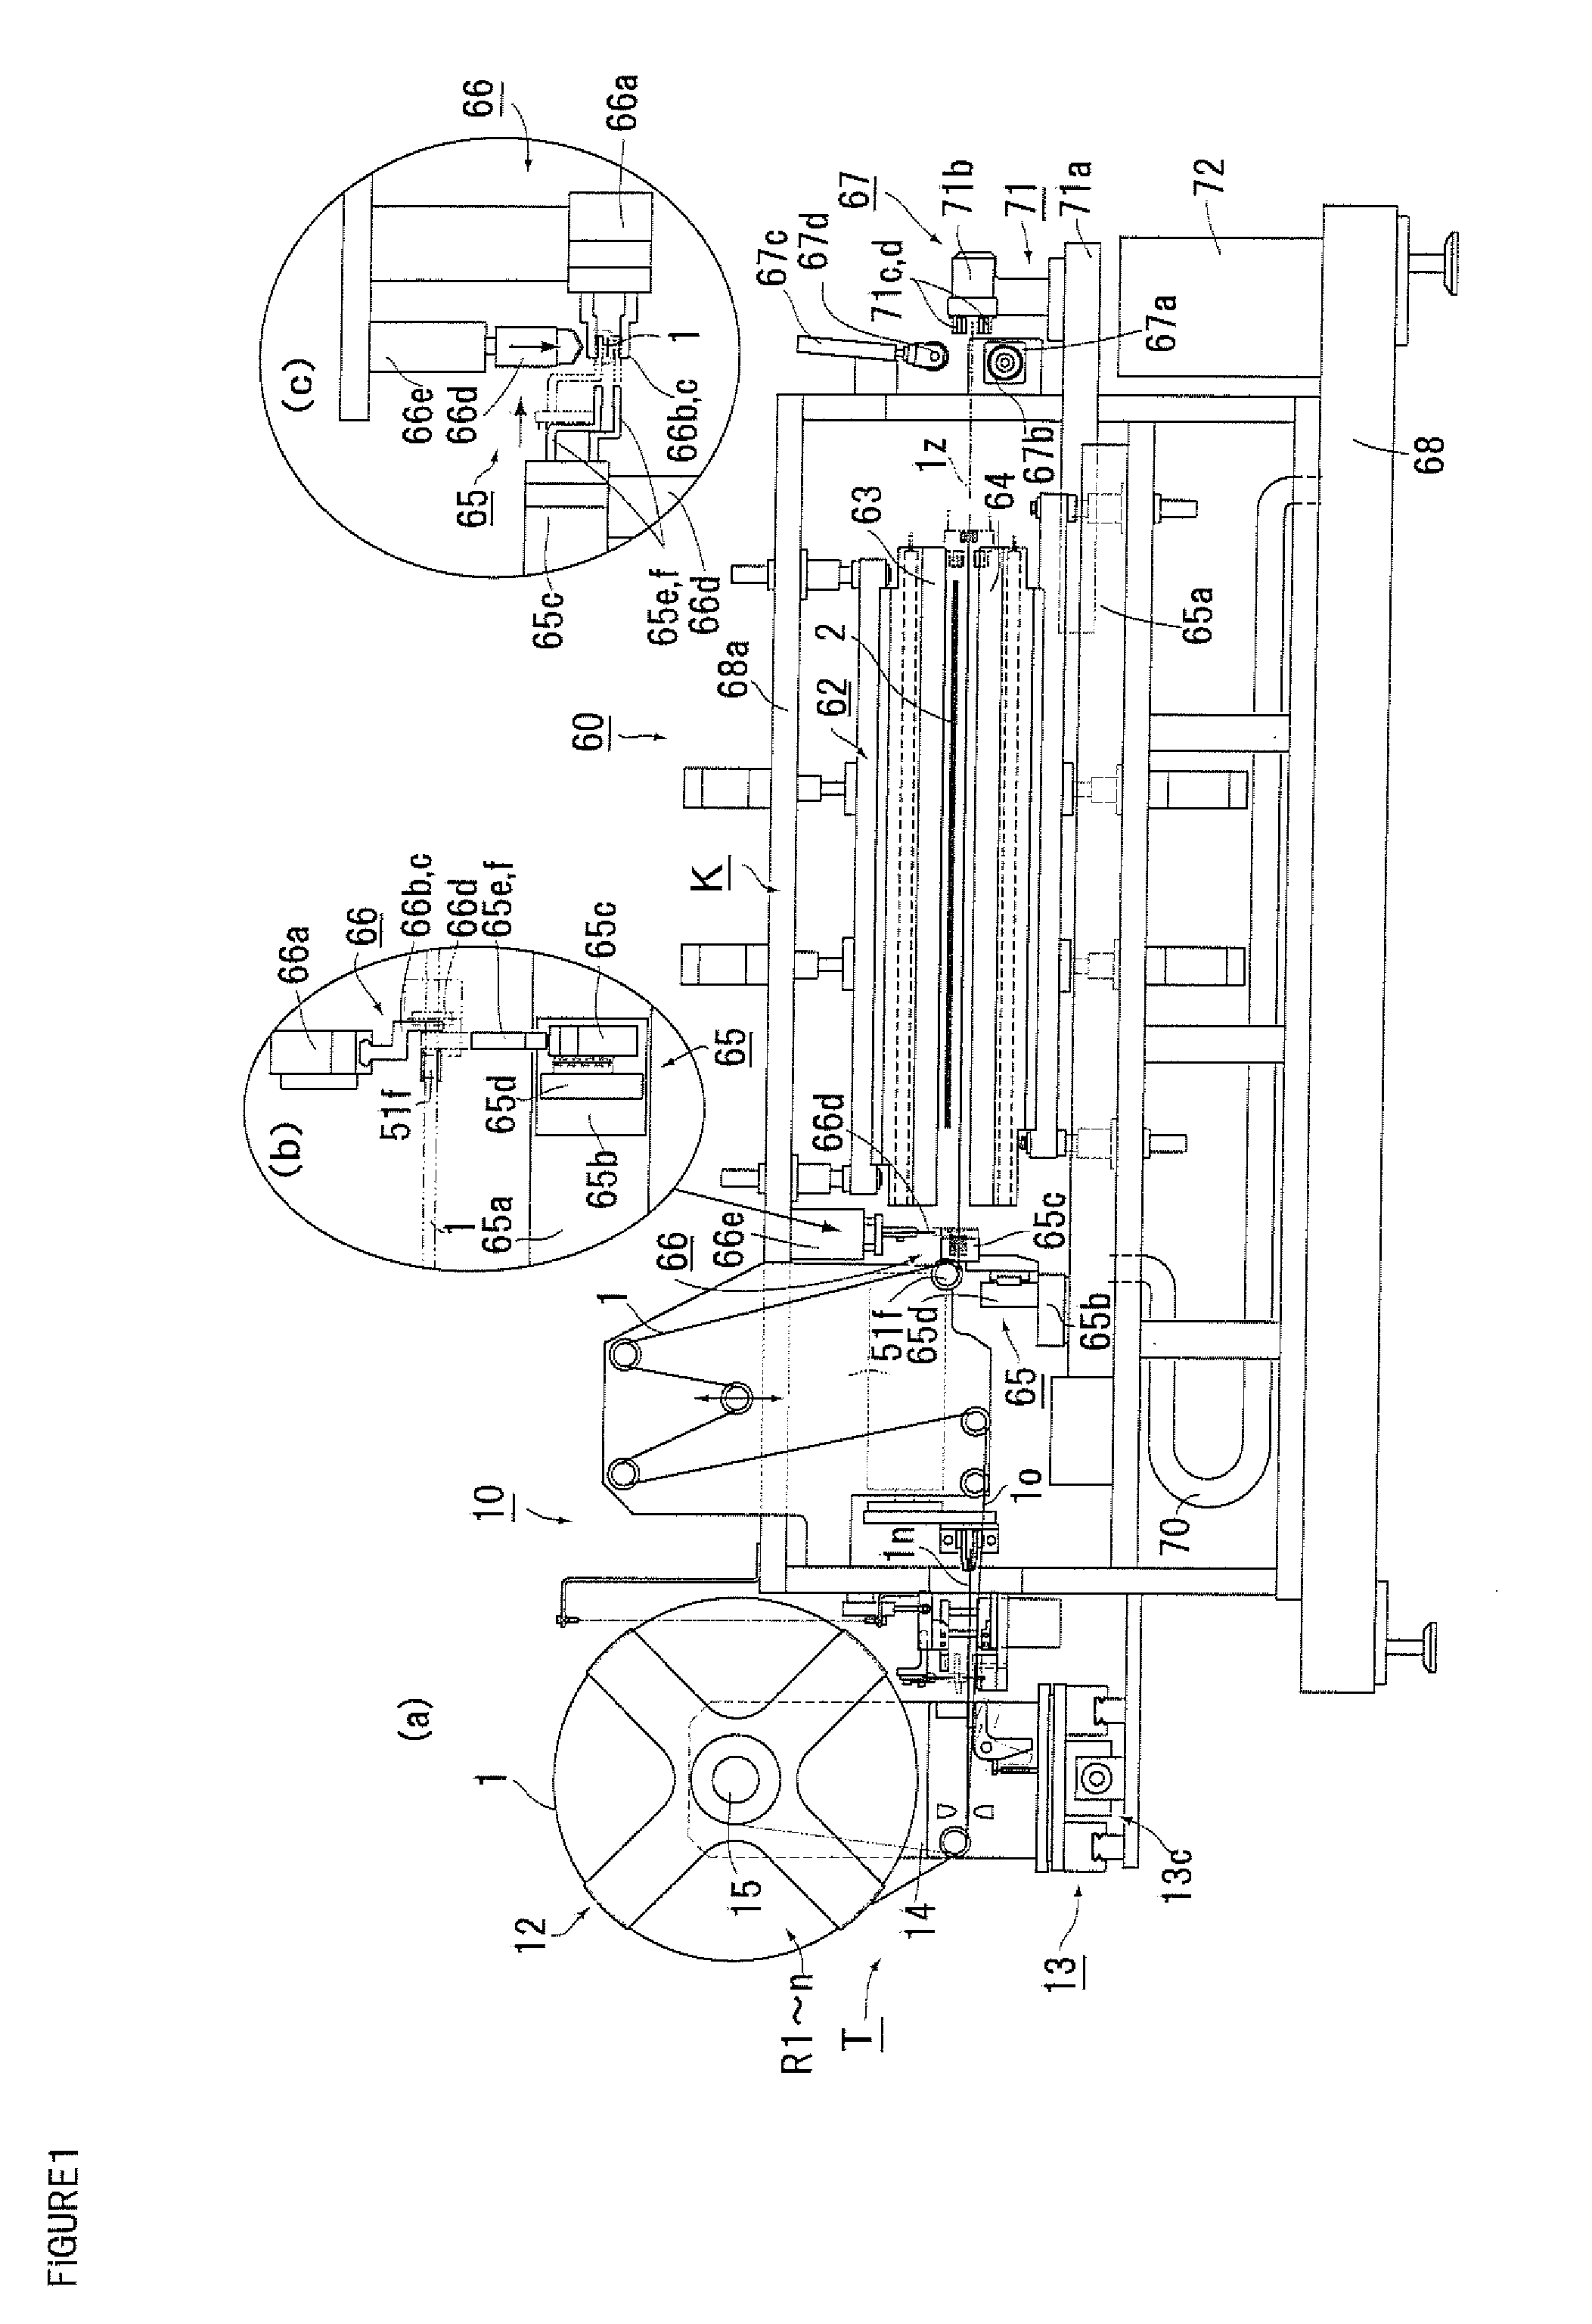 Original fabric pitch feed mechanism of original fabric manufacturing device for electrochemical element